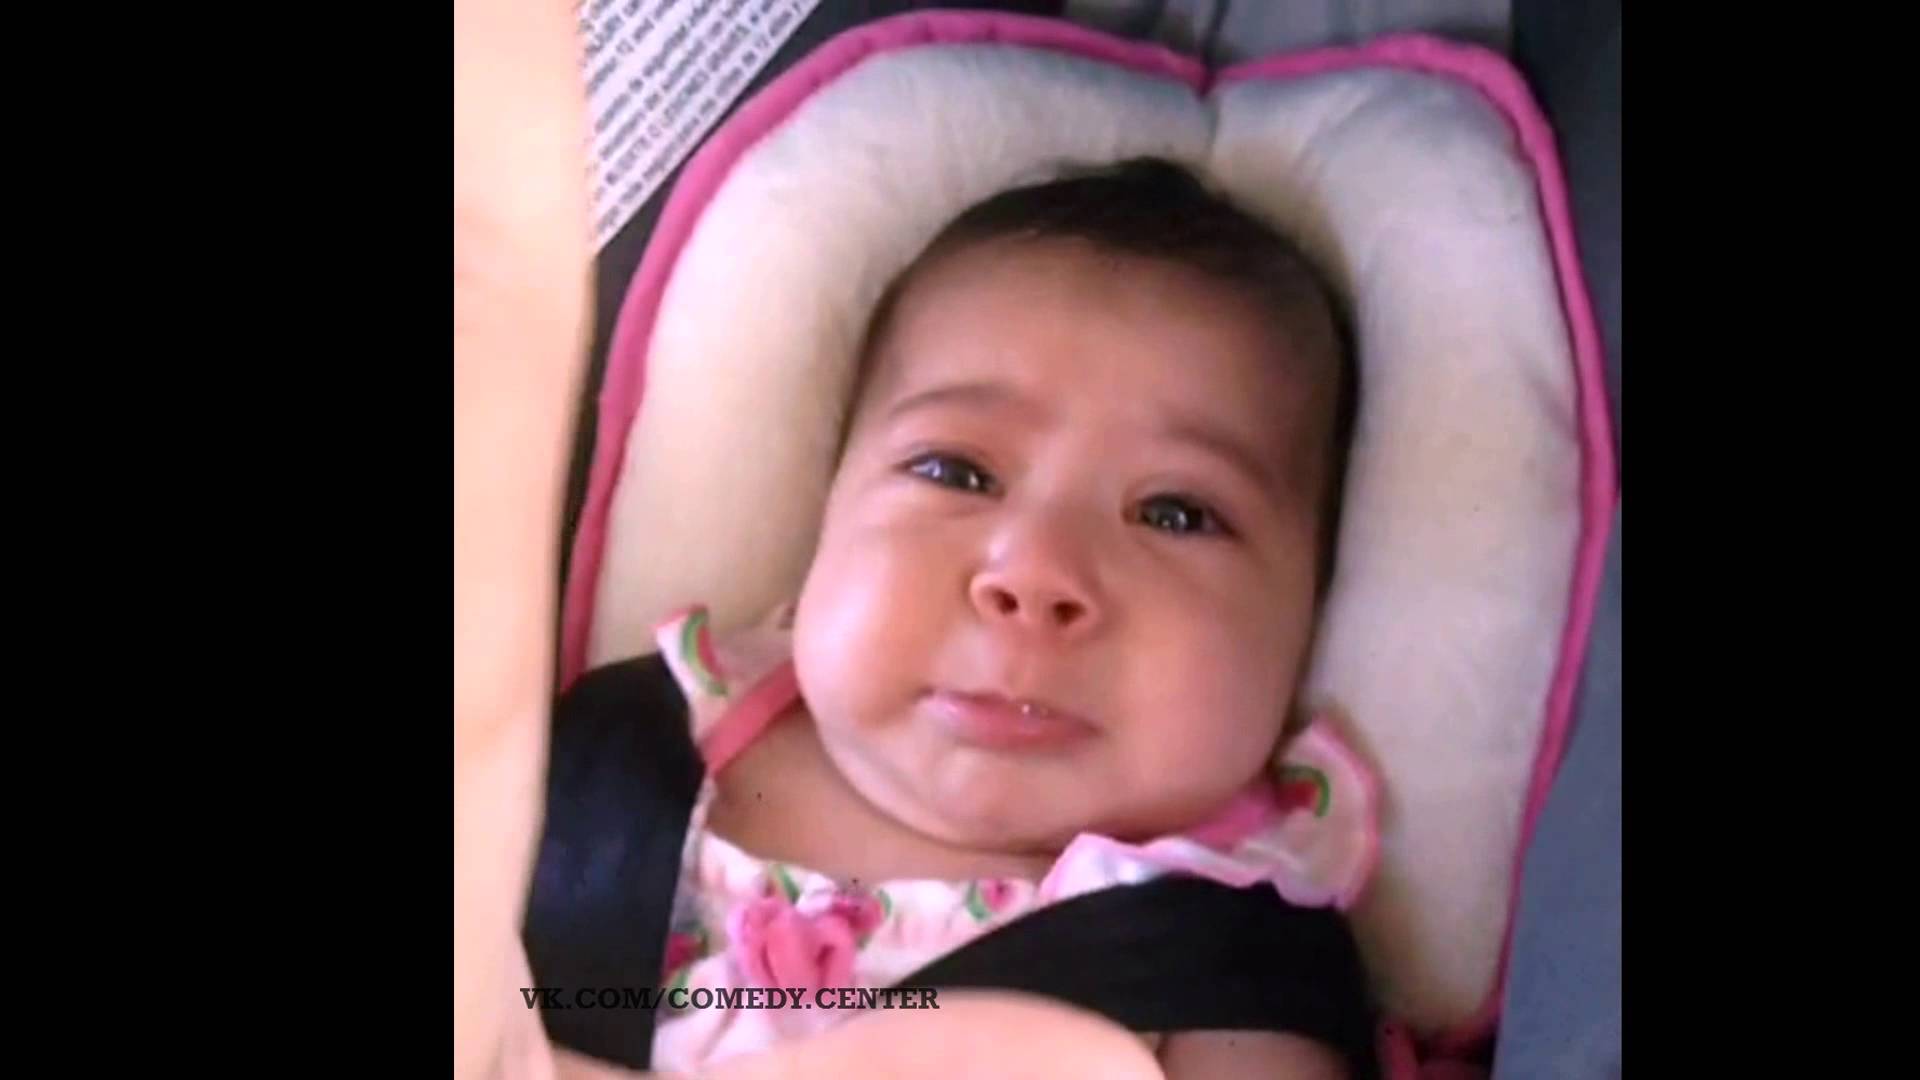 don't cry baby) (vine) - YouTube